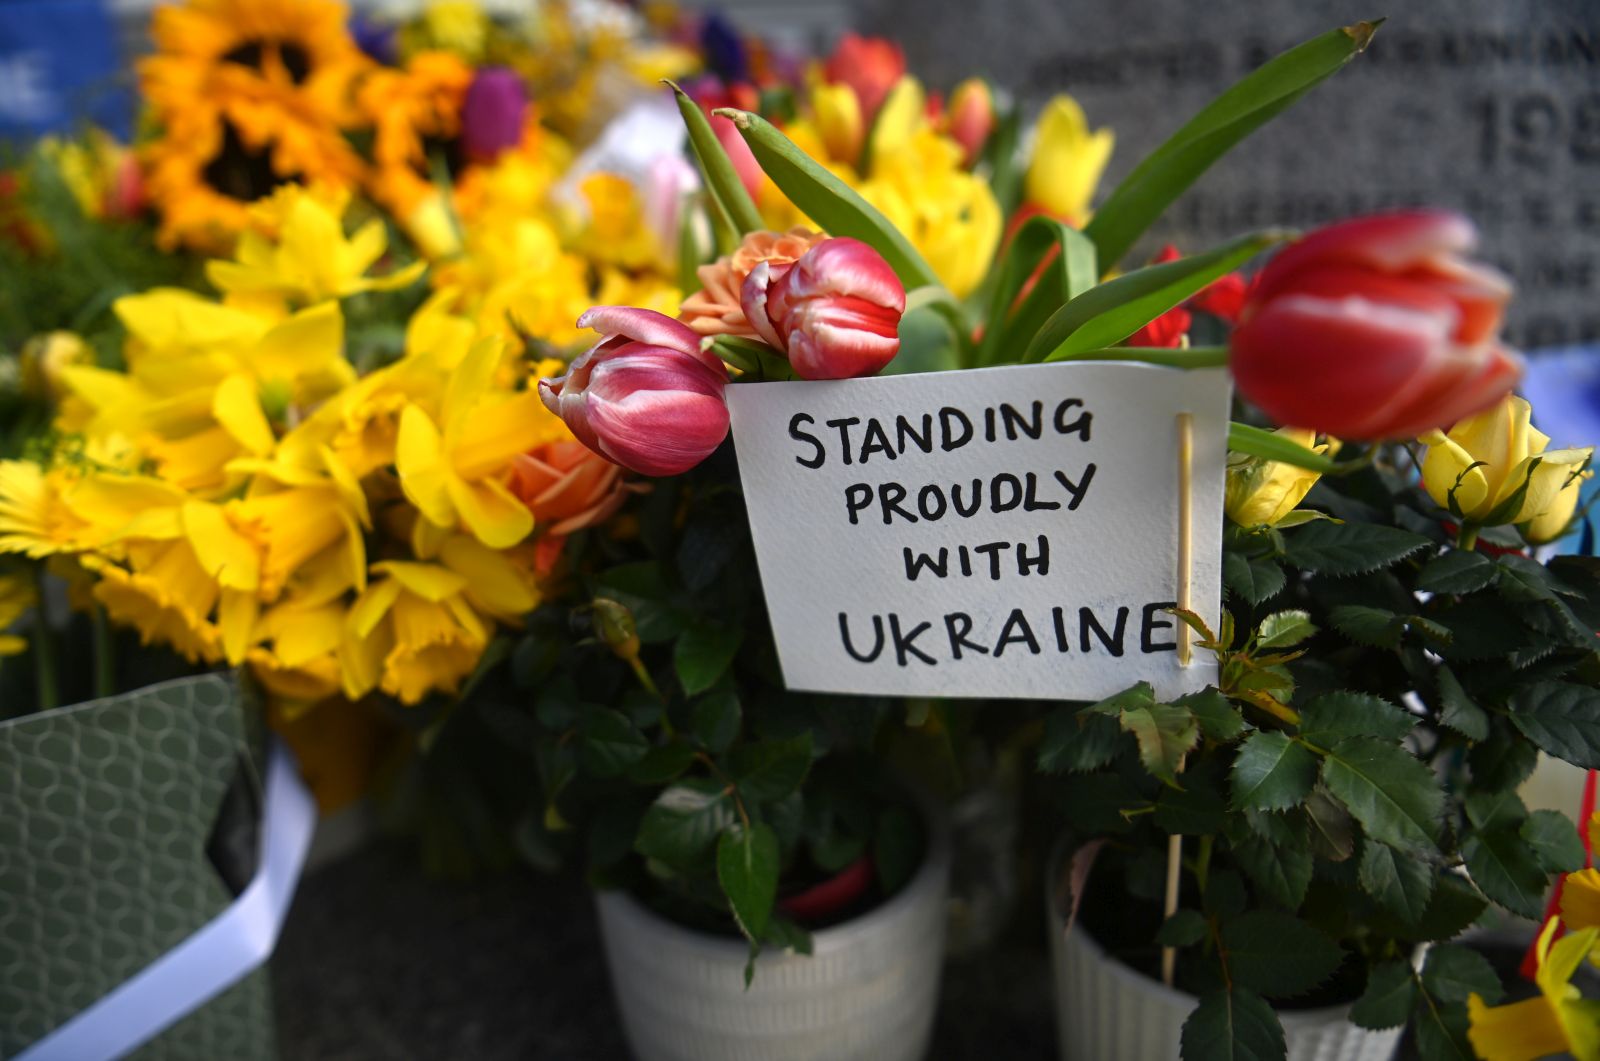 epa09814809 Tributes to Ukraine decorate a monument to St. Volodymyr the Great, near Ukraine's Embassy in London, Britain, 10 March 2022. According to United Nations High Commissioner for Refugees (UNHCR) figures, more than two million Ukrainians have fled their country since Russia began its military invasion of Ukraine on 24 February 2022.  EPA/NEIL HALL